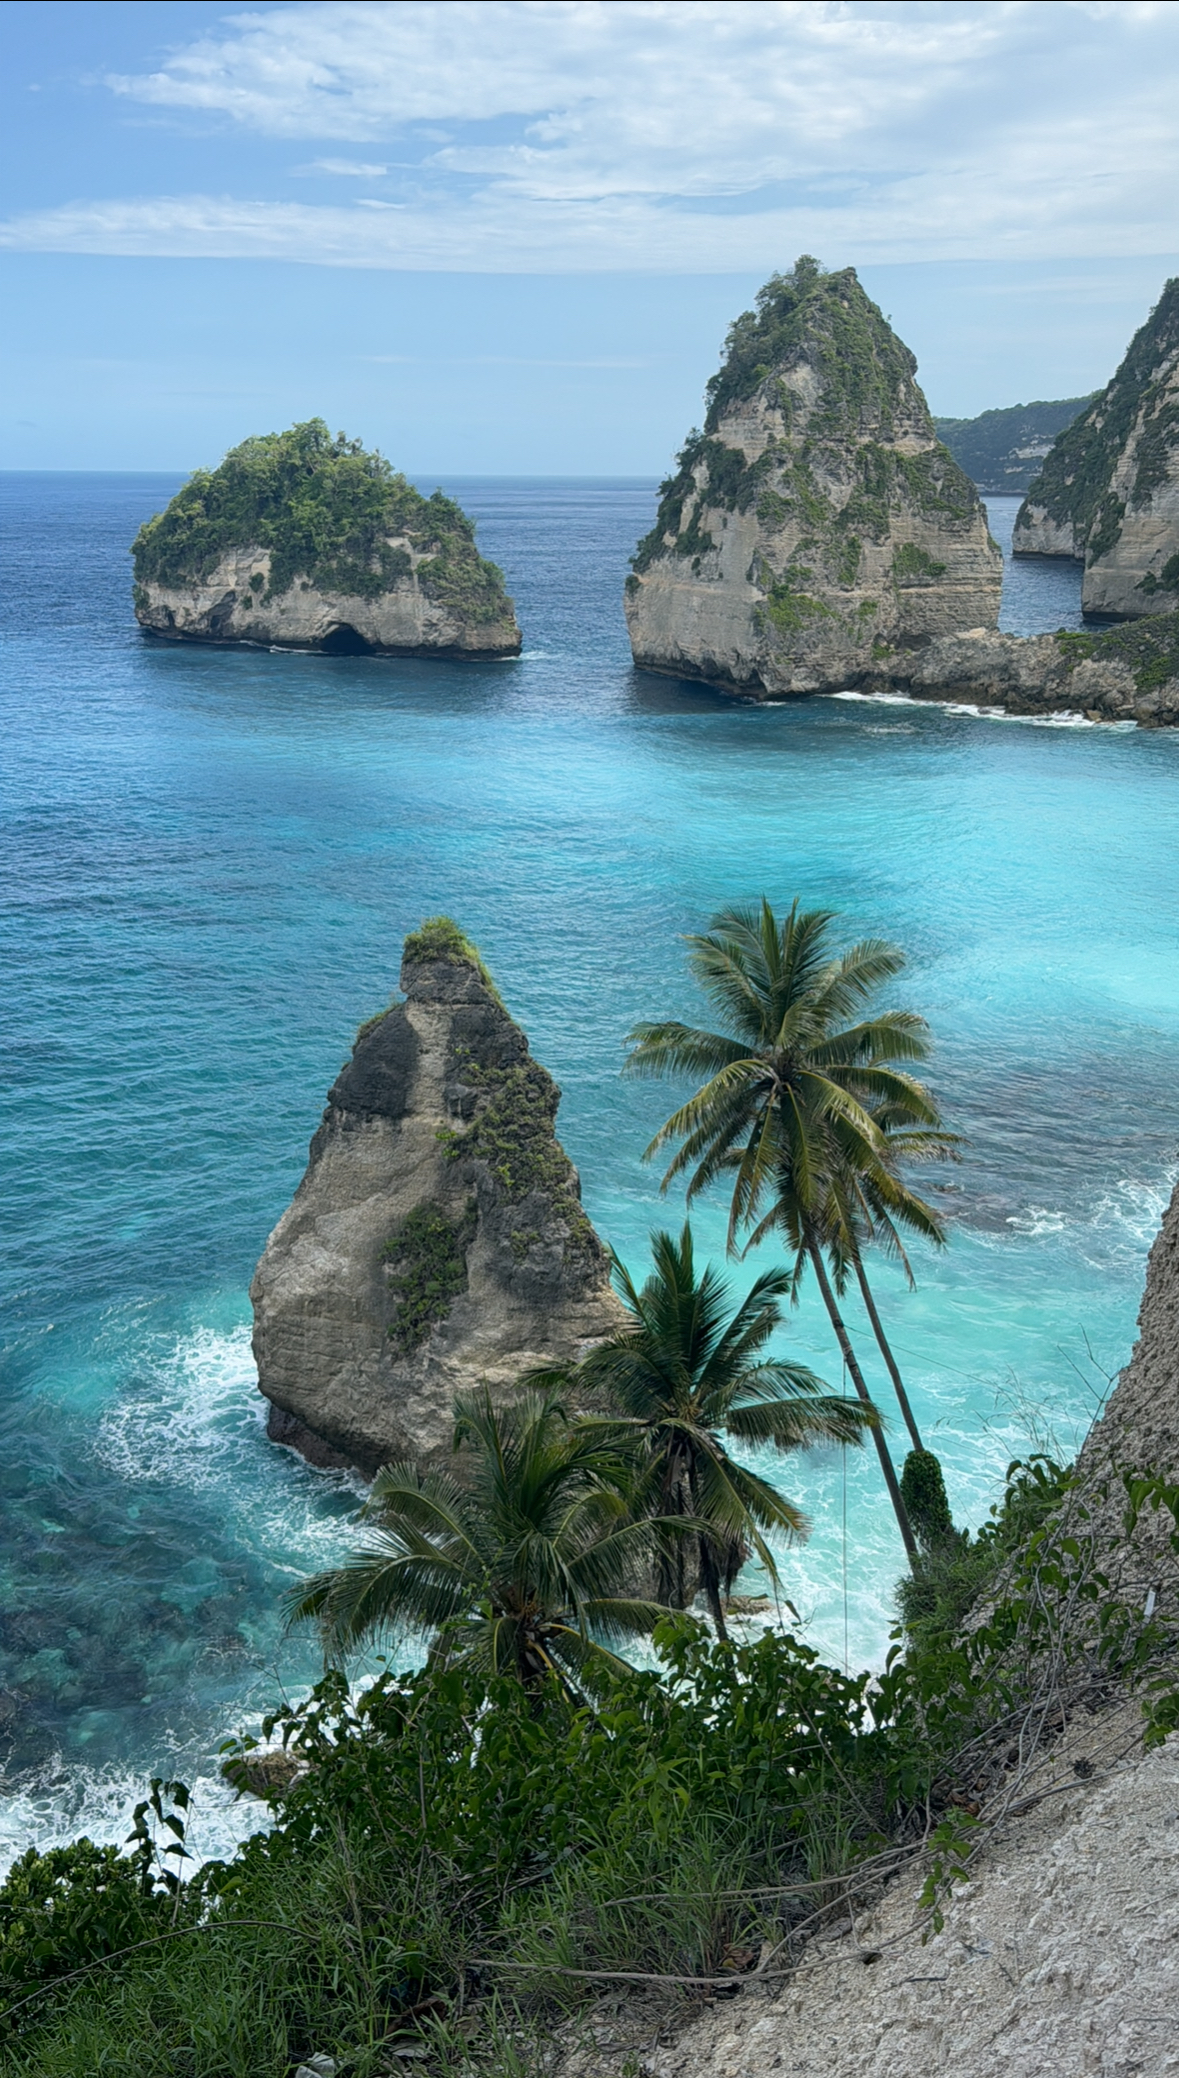 Diving into Magic: My Unforgettable Day on Nusa Penida